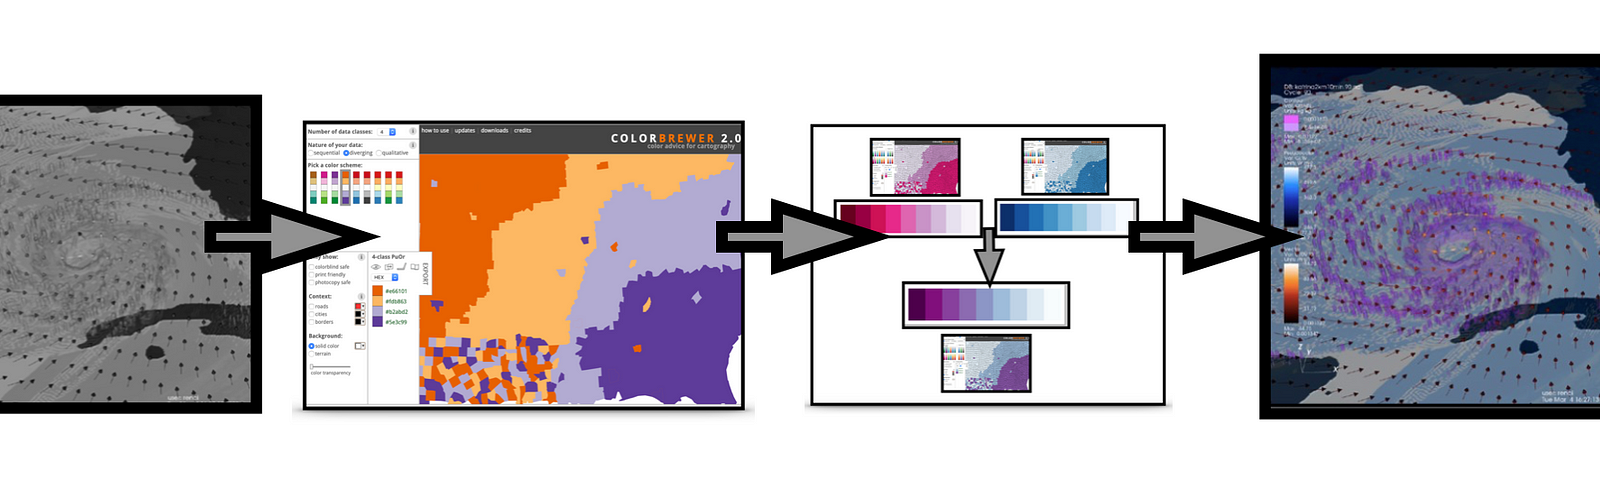 Flow Chart of the Process of Colorizing the Perfect Storm Animation.